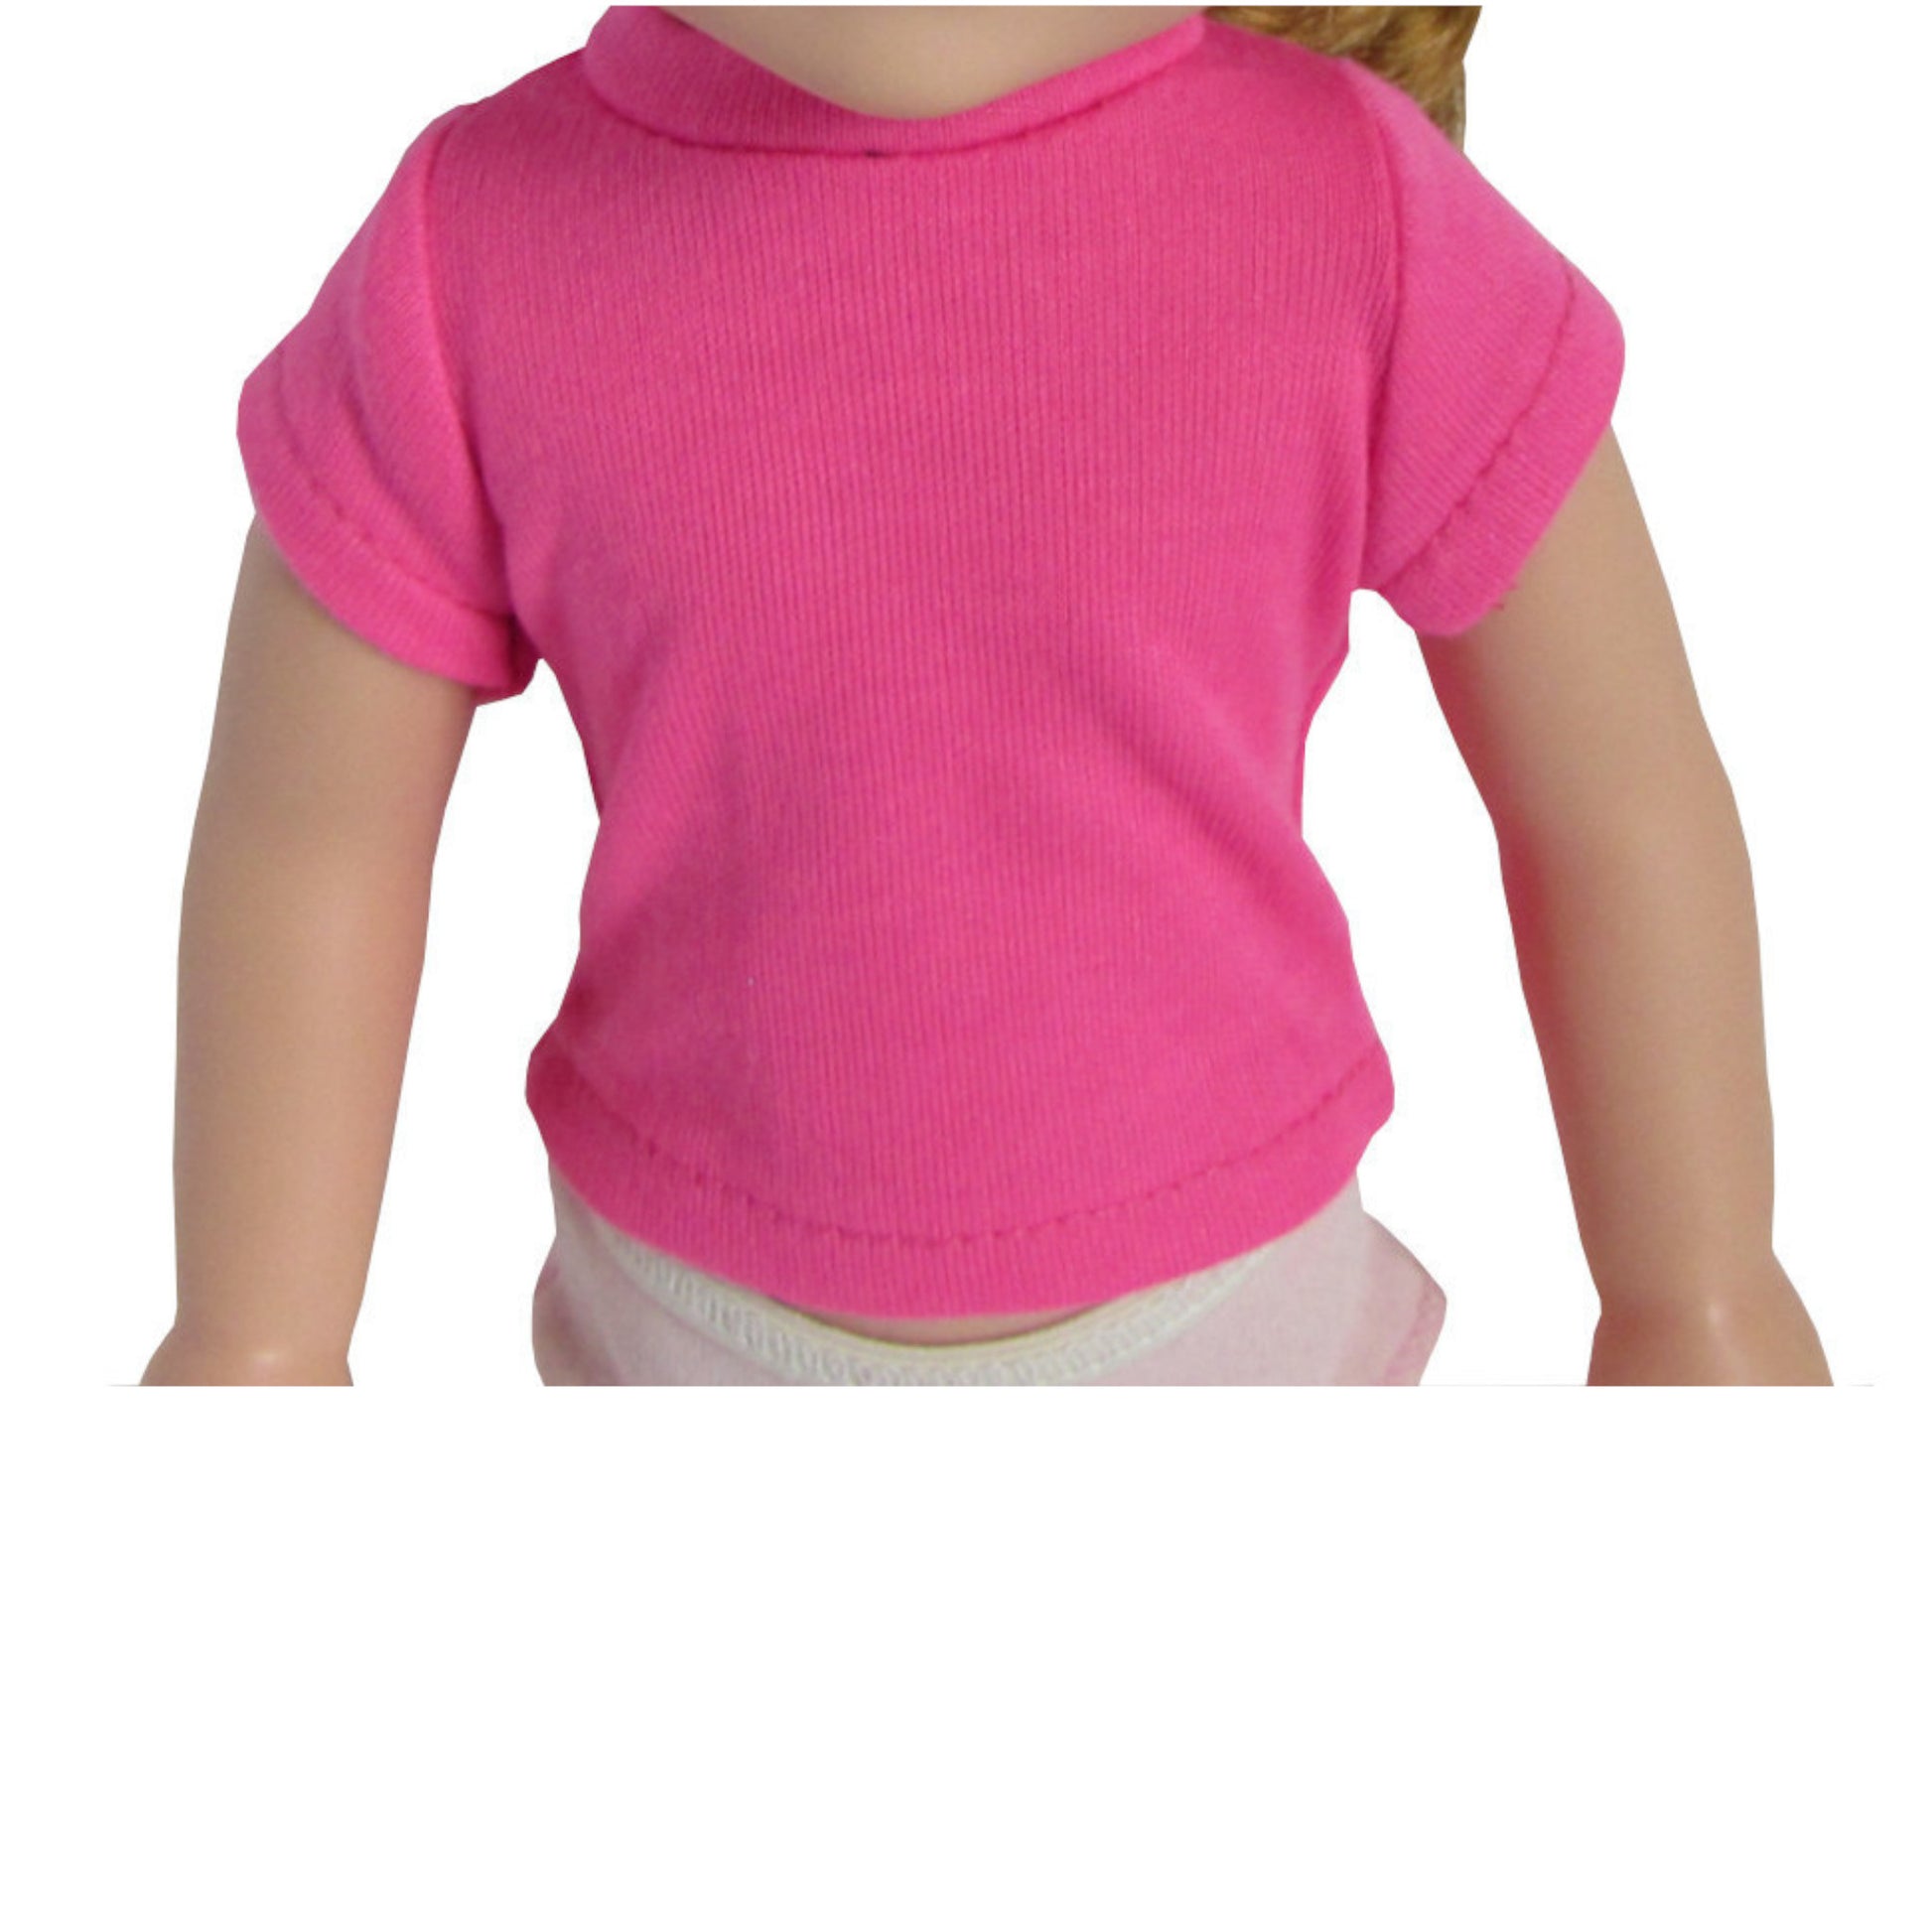 Hot Pink T-Shirt for 14 1/2-inch dolls with doll